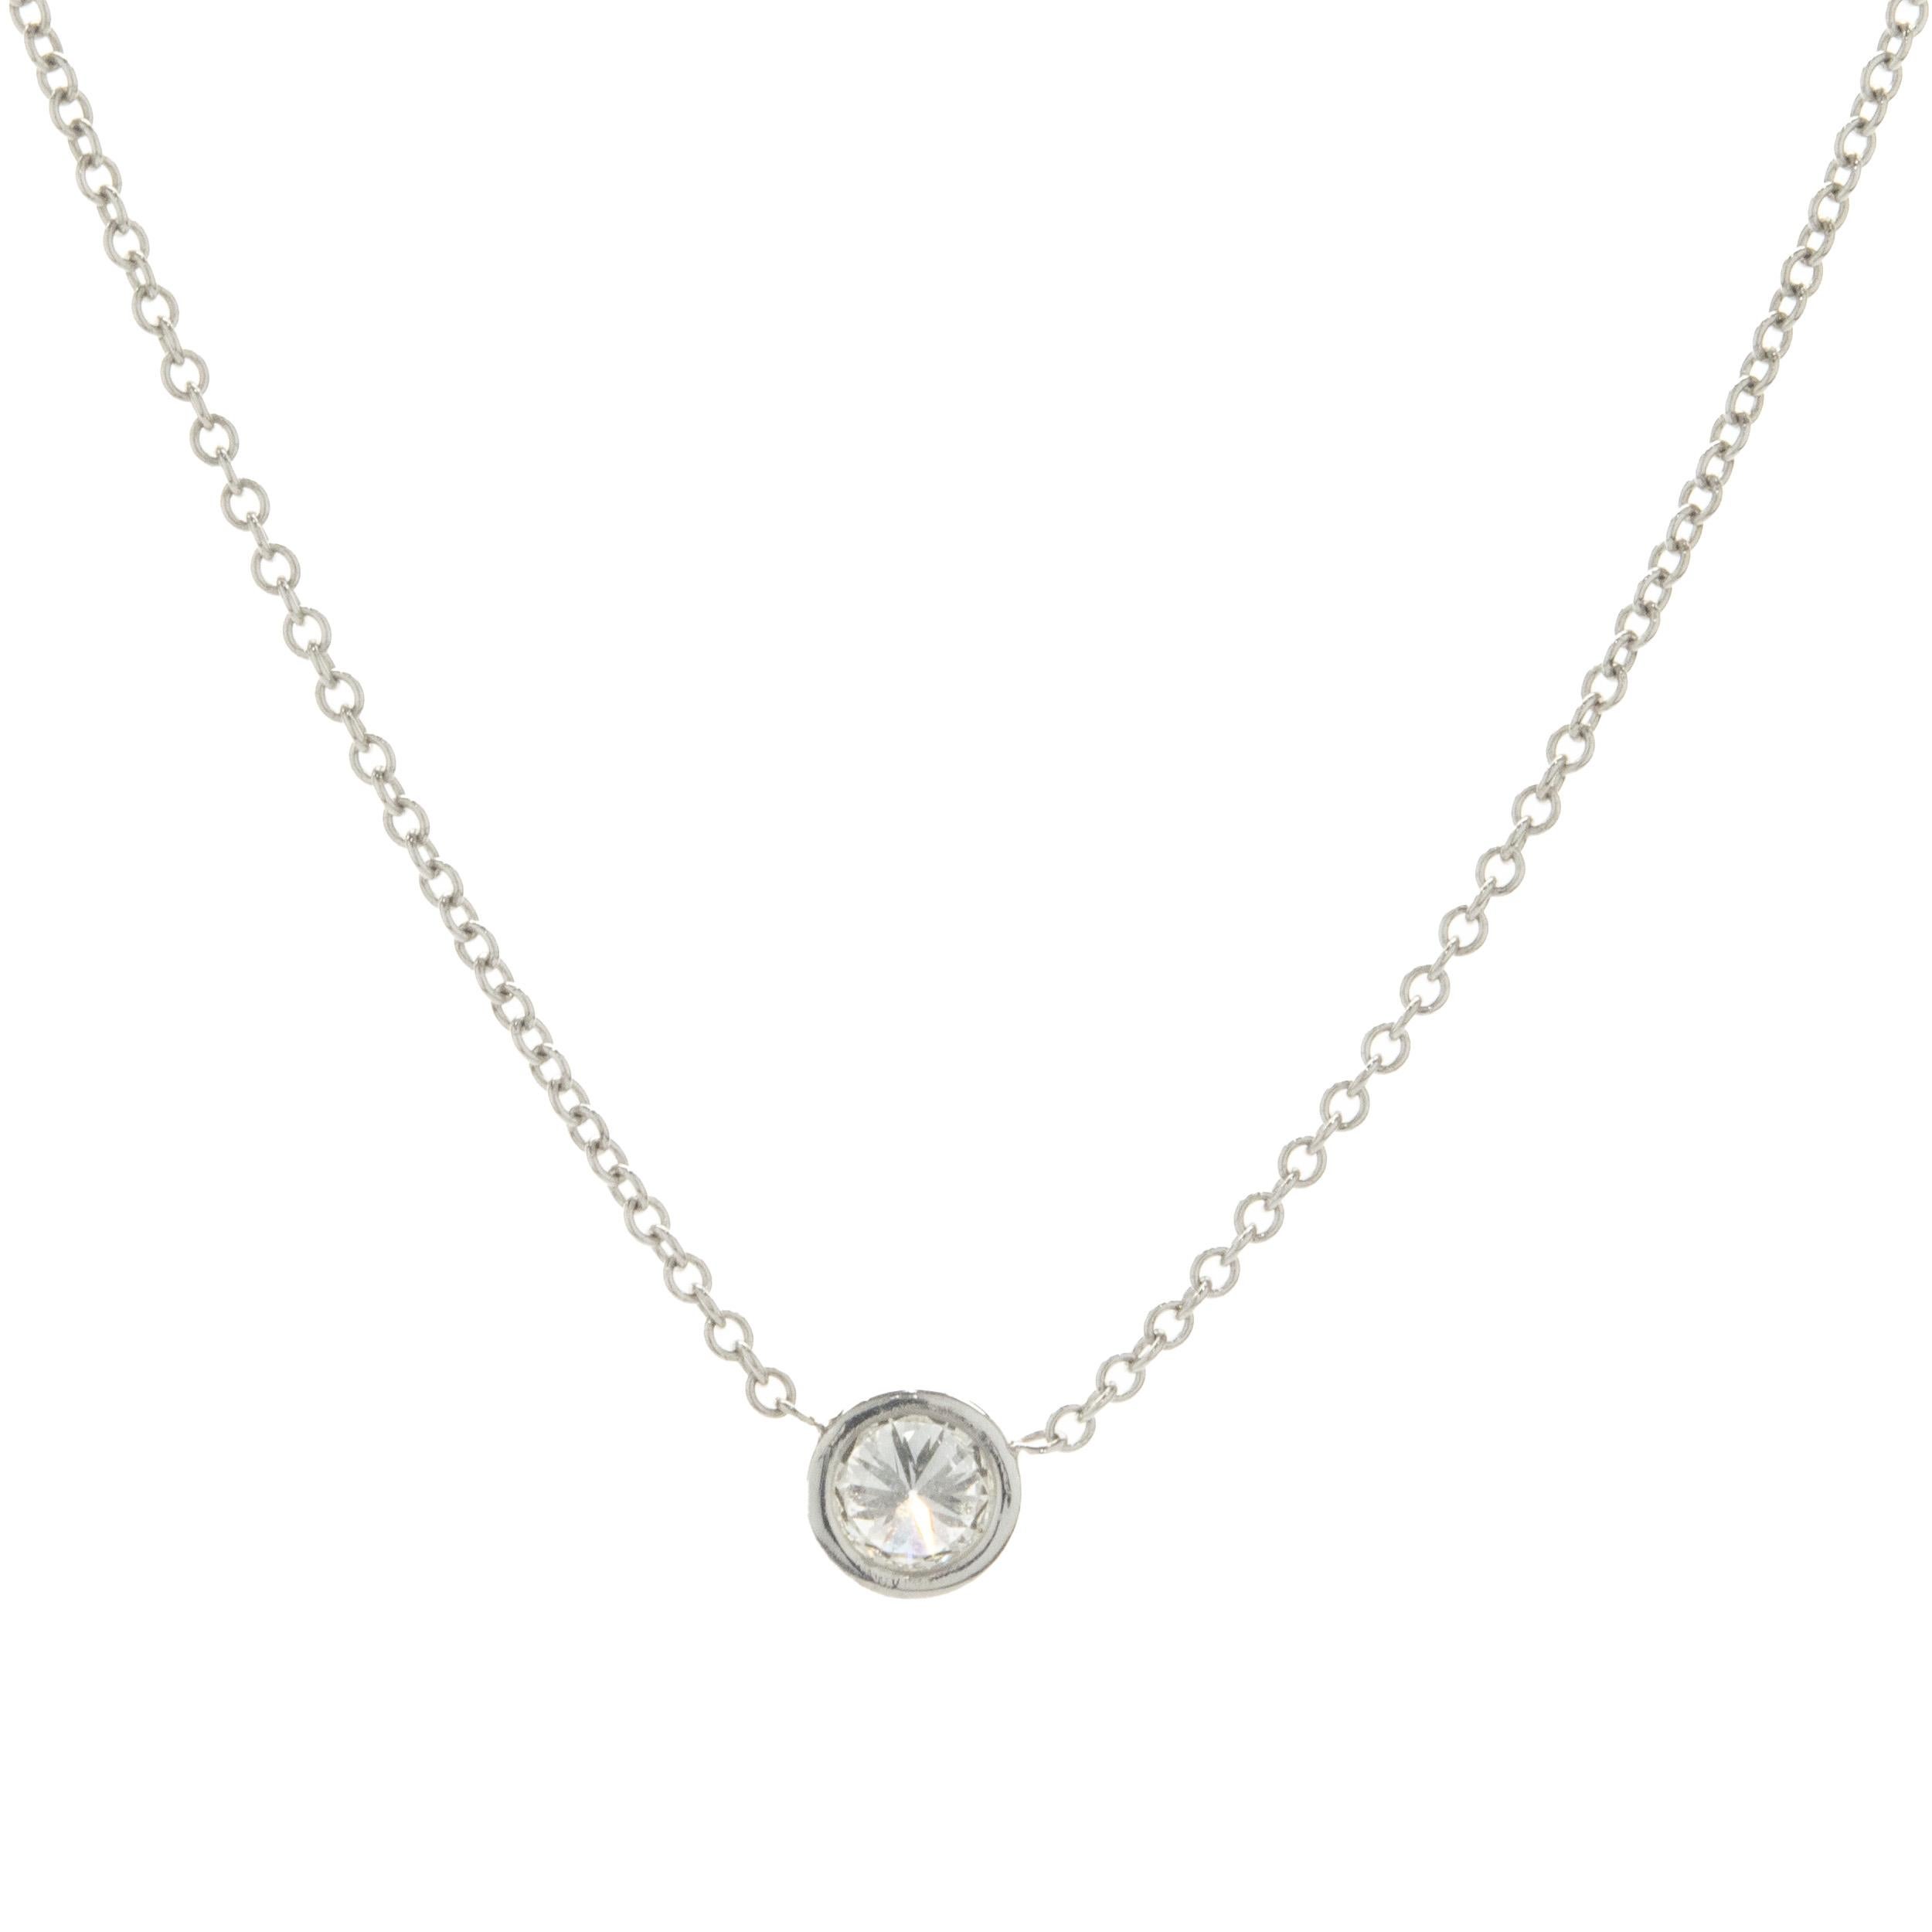 Designer: custom design
Material: 14K white gold
Diamond: round brilliant cut = 0.20cttw
Color: G
Clarity: VS2
Dimensions: necklace measures 18-inches in length 
Weight: 1.31 grams